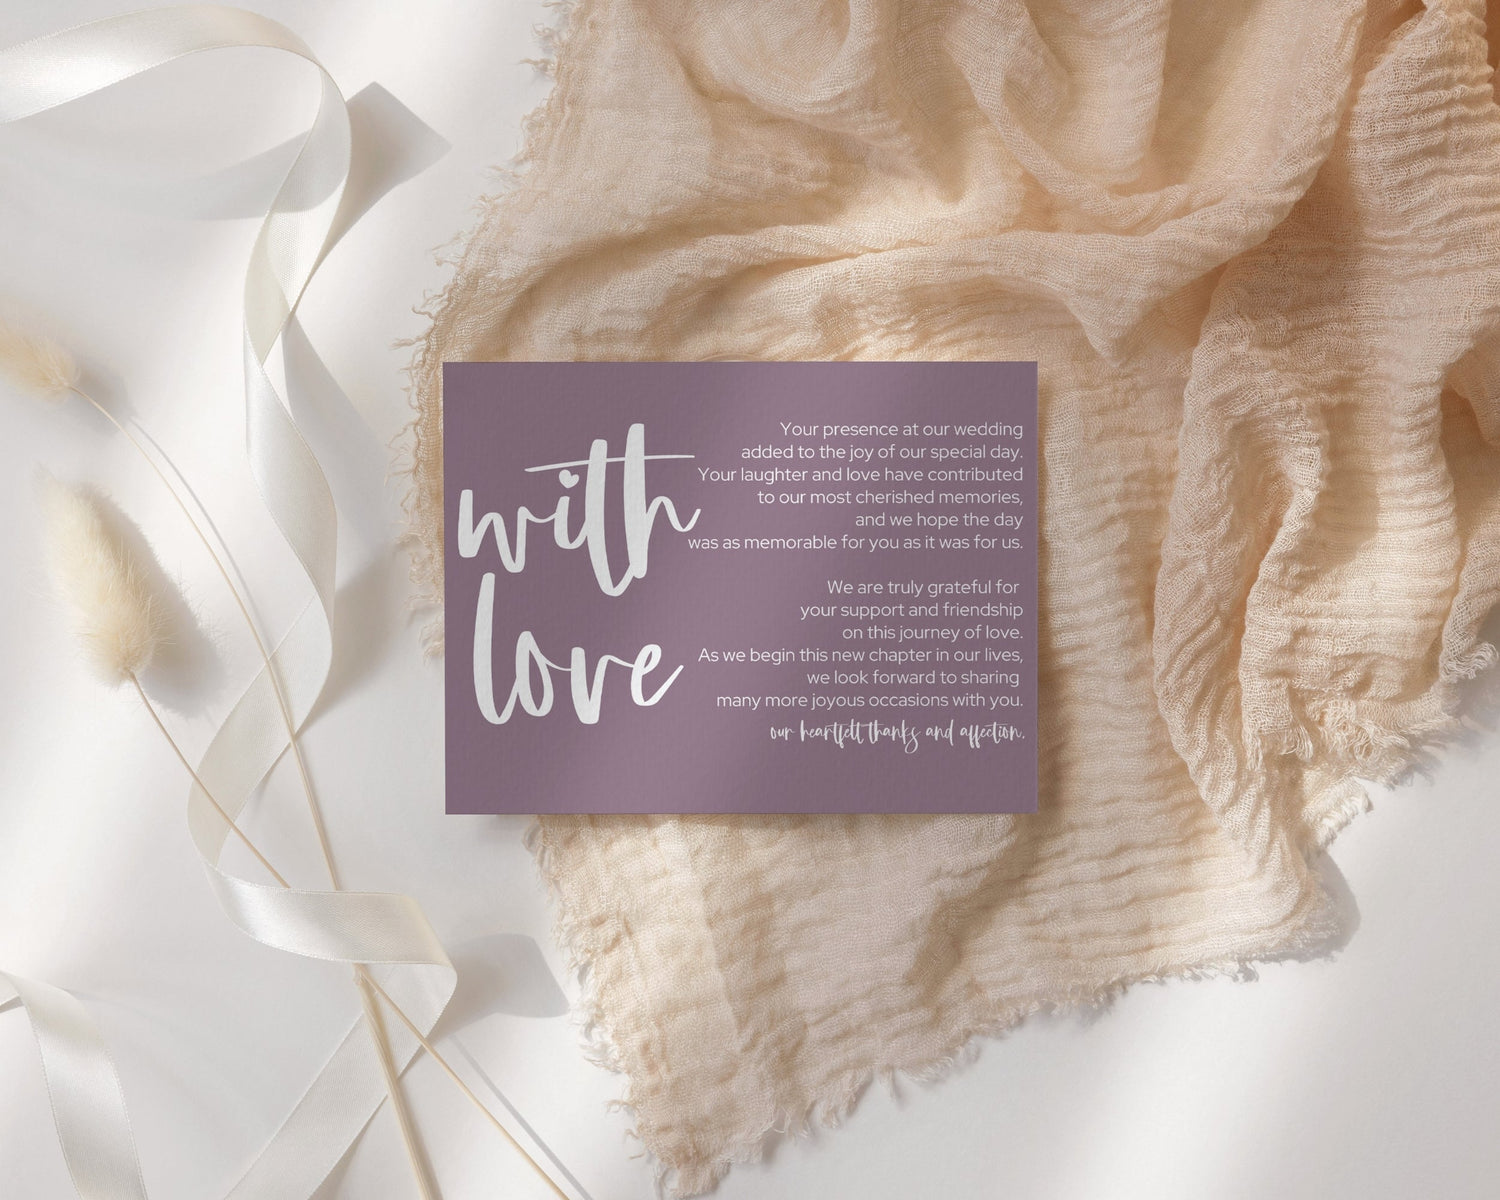 Show your guests heartfelt appreciation with our wedding table thank you cards<span>. Select from elegant designs that complement your wedding decor. Shop now for the perfect finishing touch to your table settings.